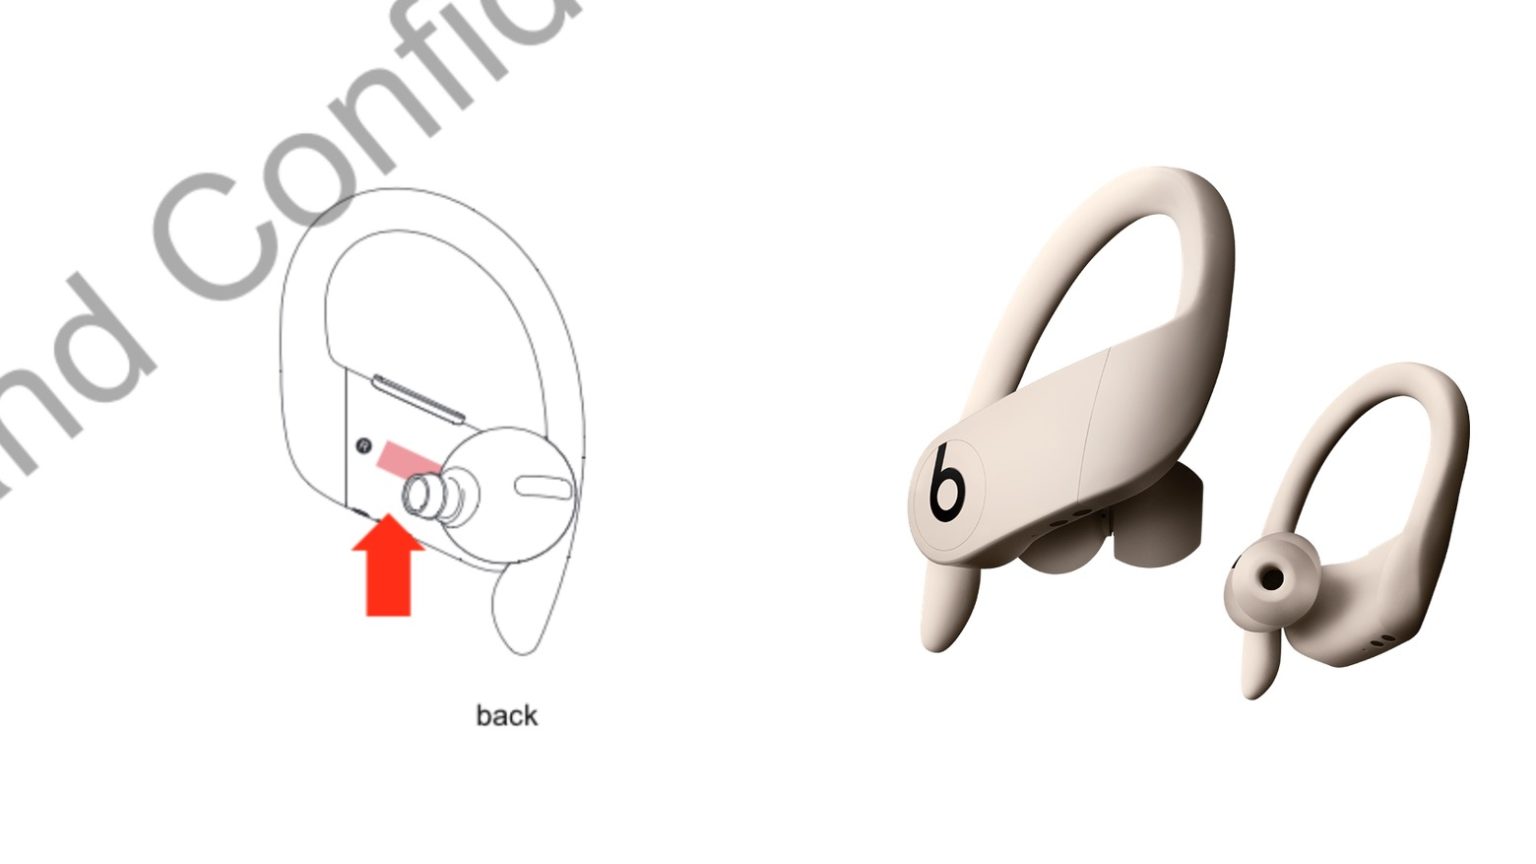 This might be the 2020 Powerbeats Pro next to the 2019 one